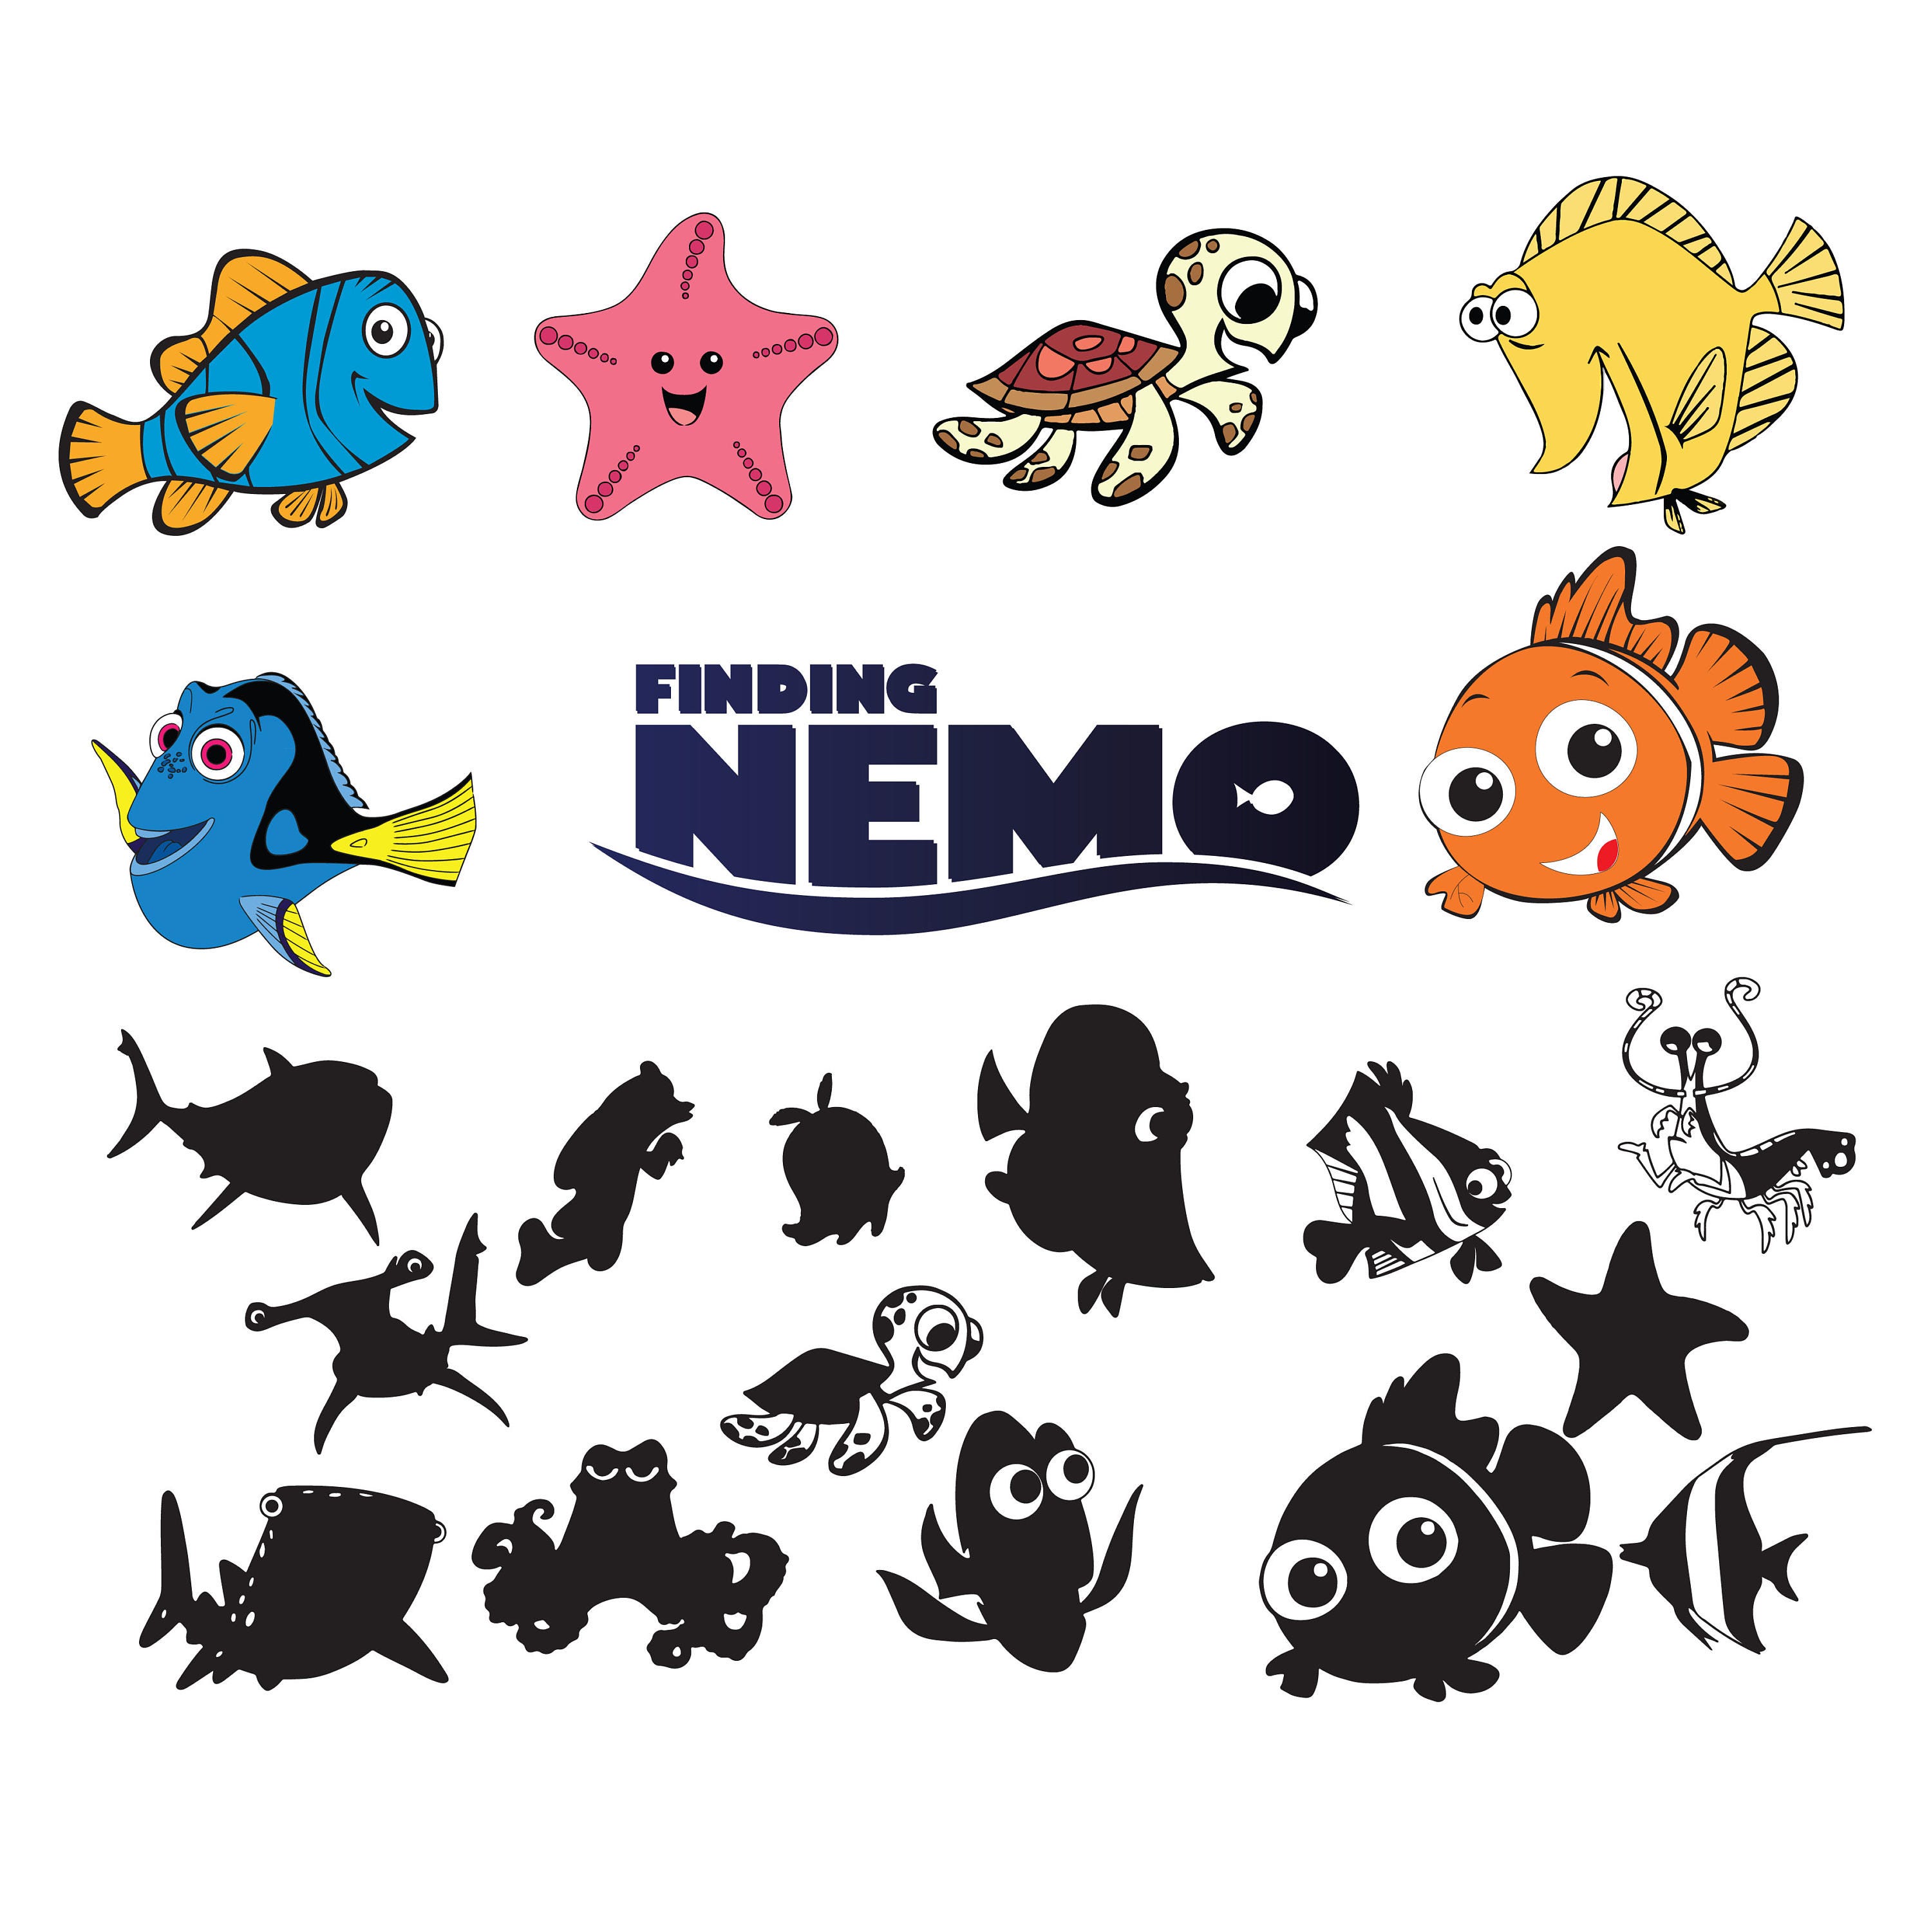 Finding nemo svgNemo pngjpgeps for Print/ Silhouette